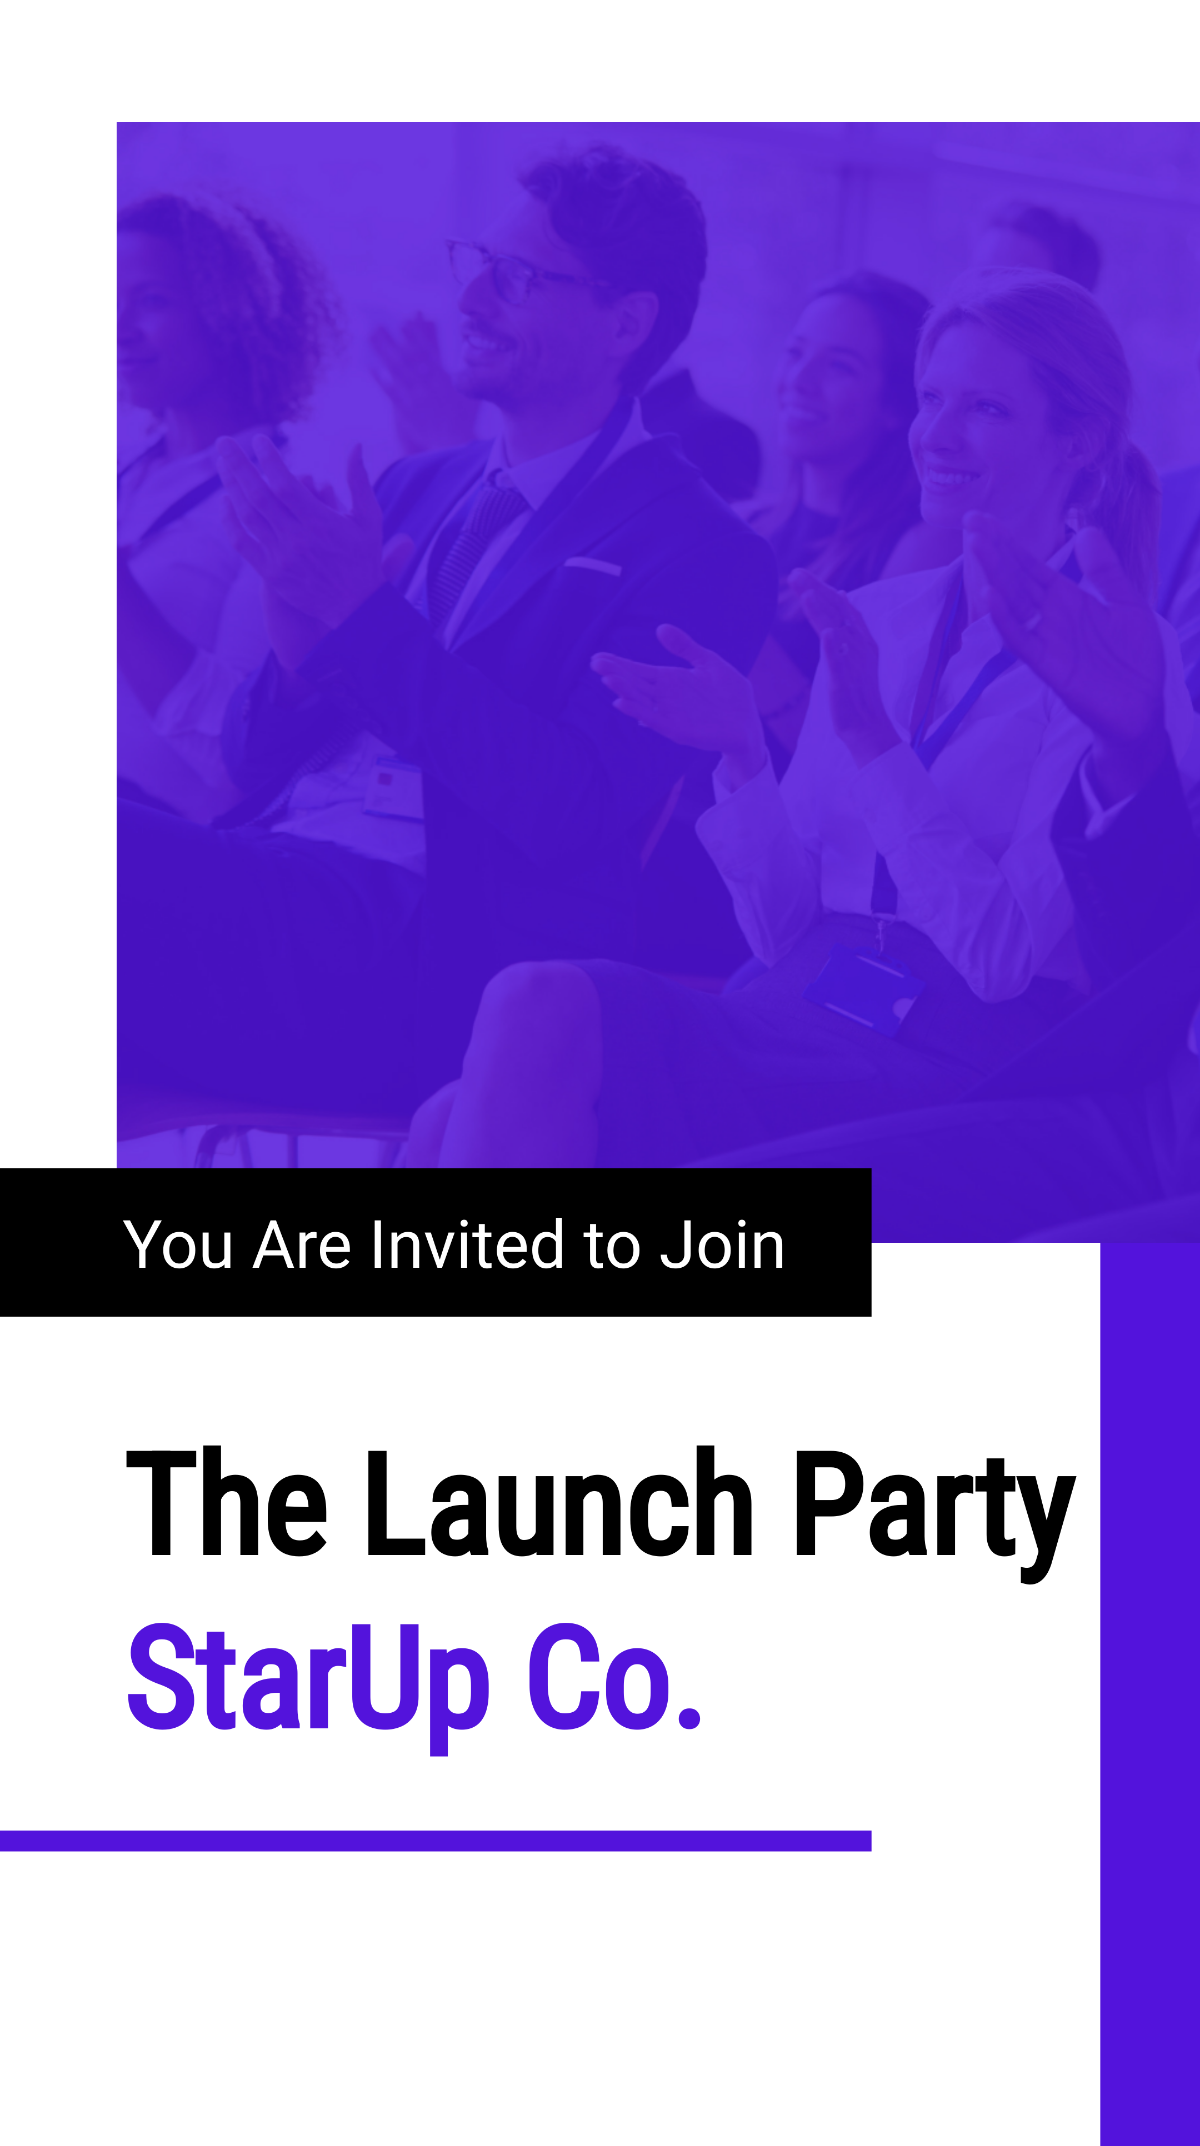 Startup Launch Party Whatsapp Post